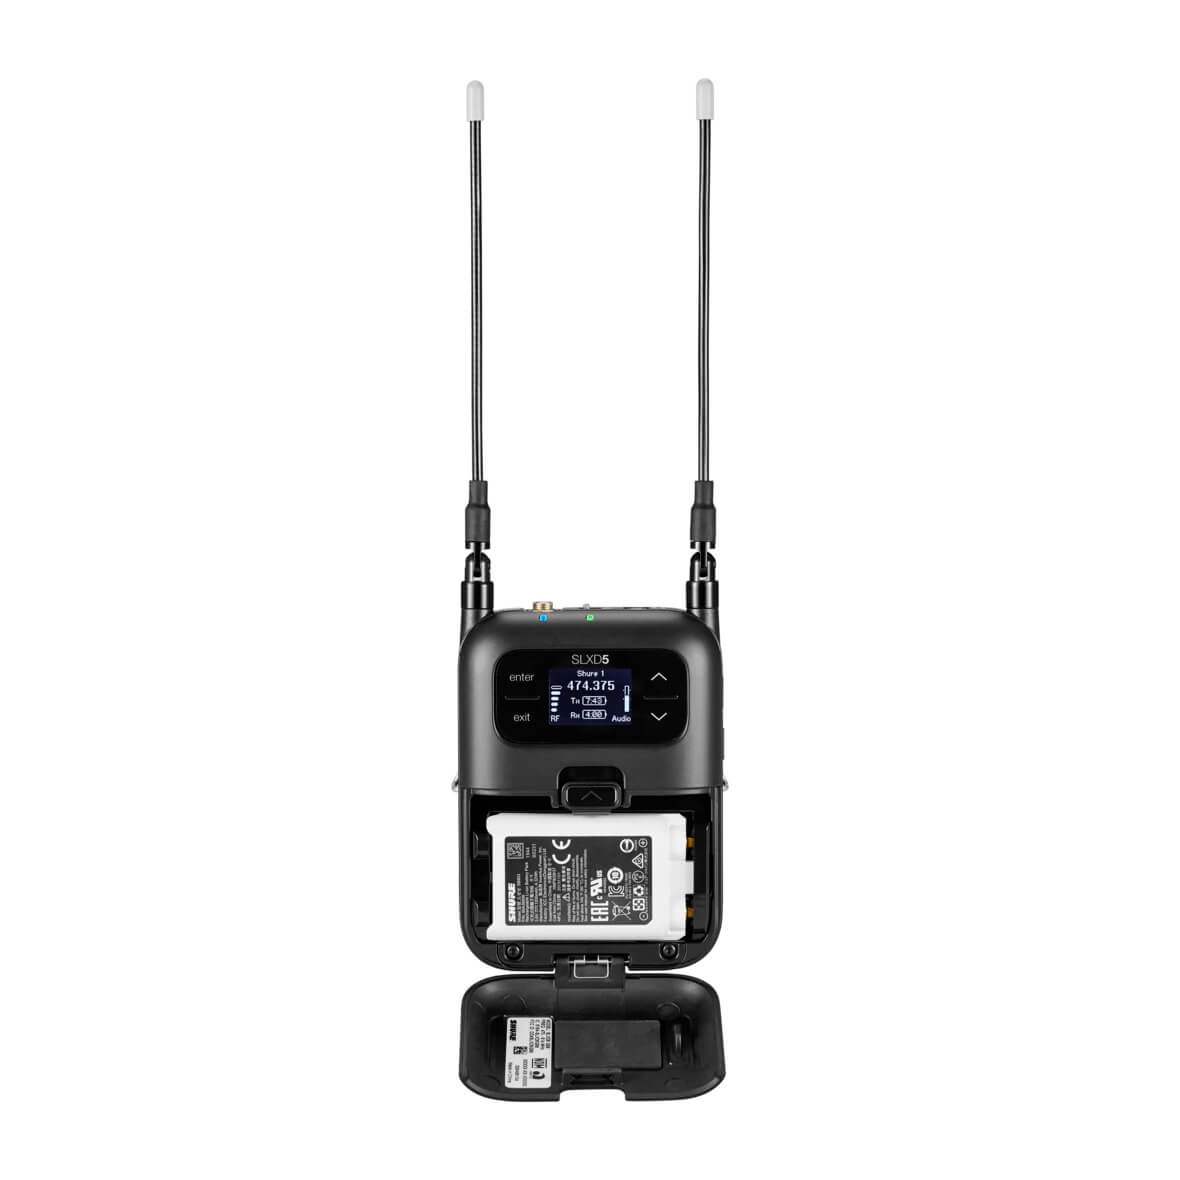 Shure SLXD5 single-channel portable receiver, shown with optional rechargeable battery